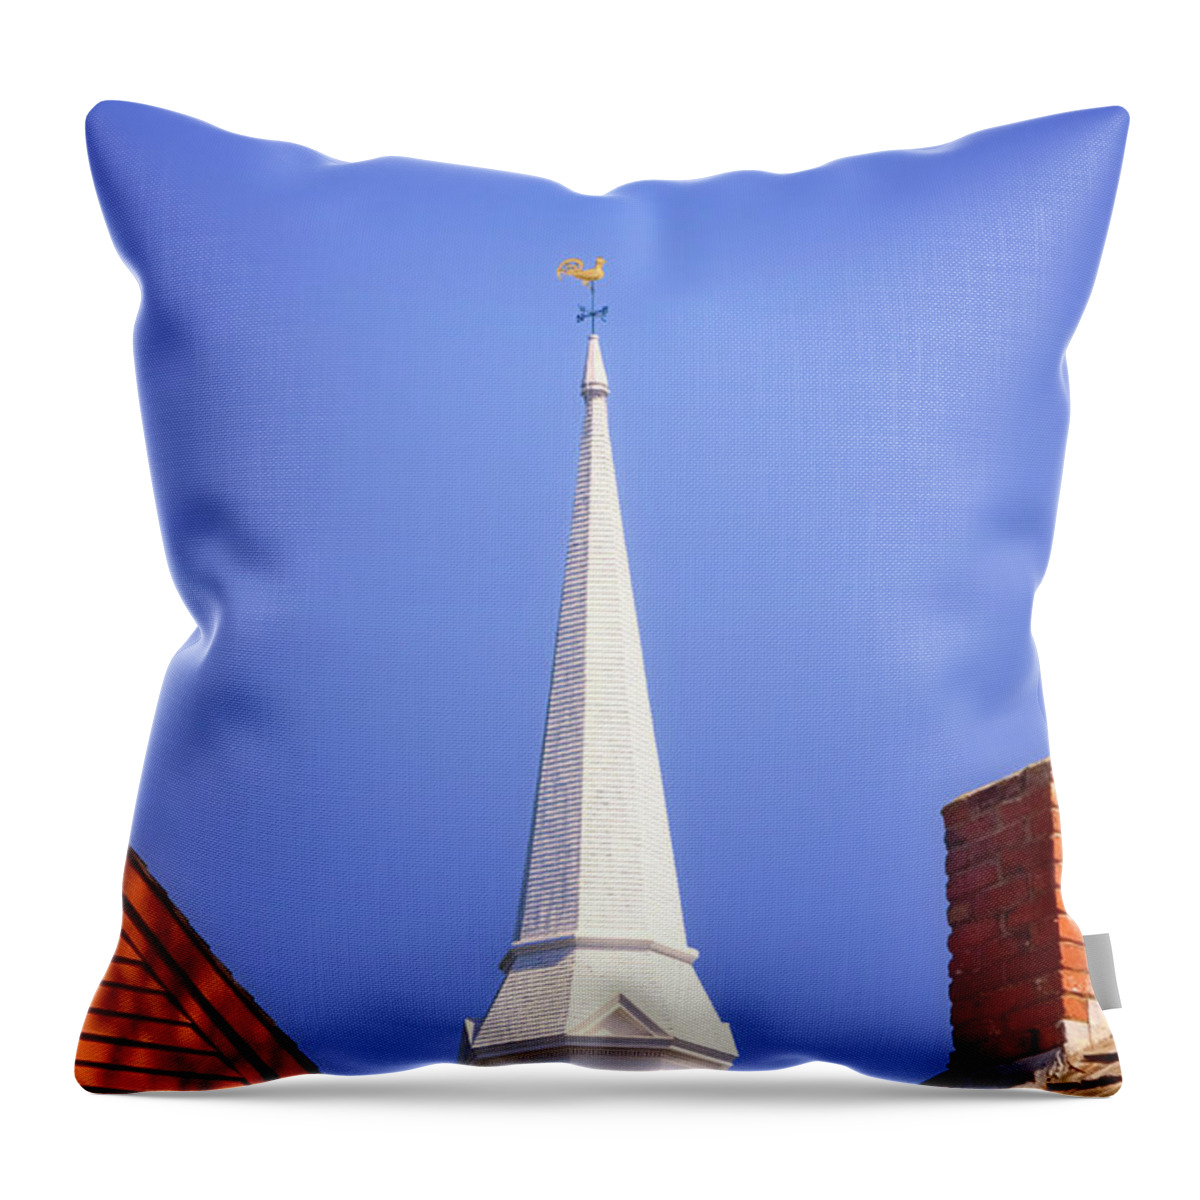 Clear Sky Throw Pillow featuring the photograph Traditional Church Steeple by Joseph Devenney